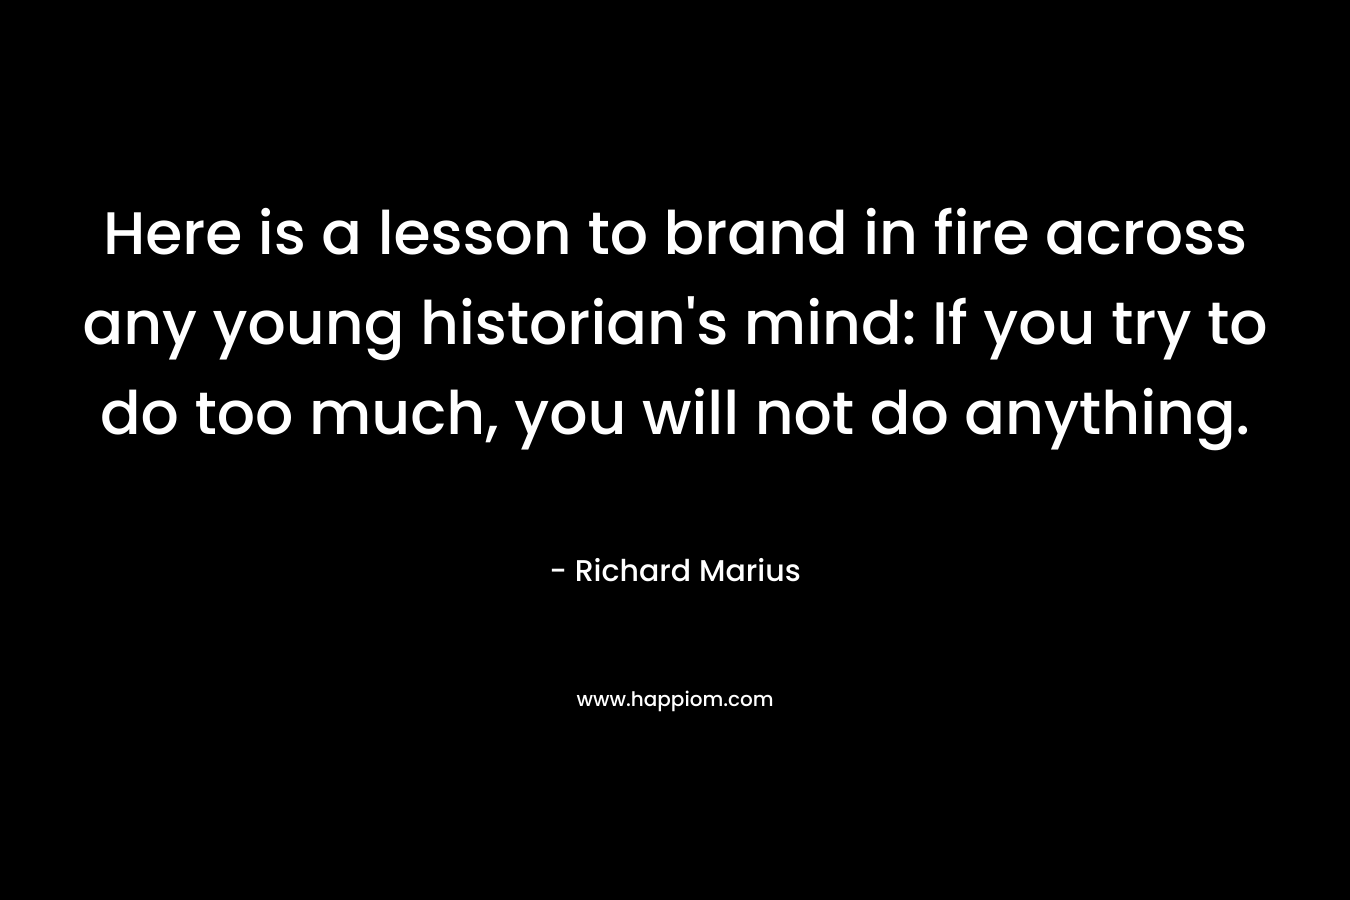 Here is a lesson to brand in fire across any young historian’s mind: If you try to do too much, you will not do anything. – Richard Marius